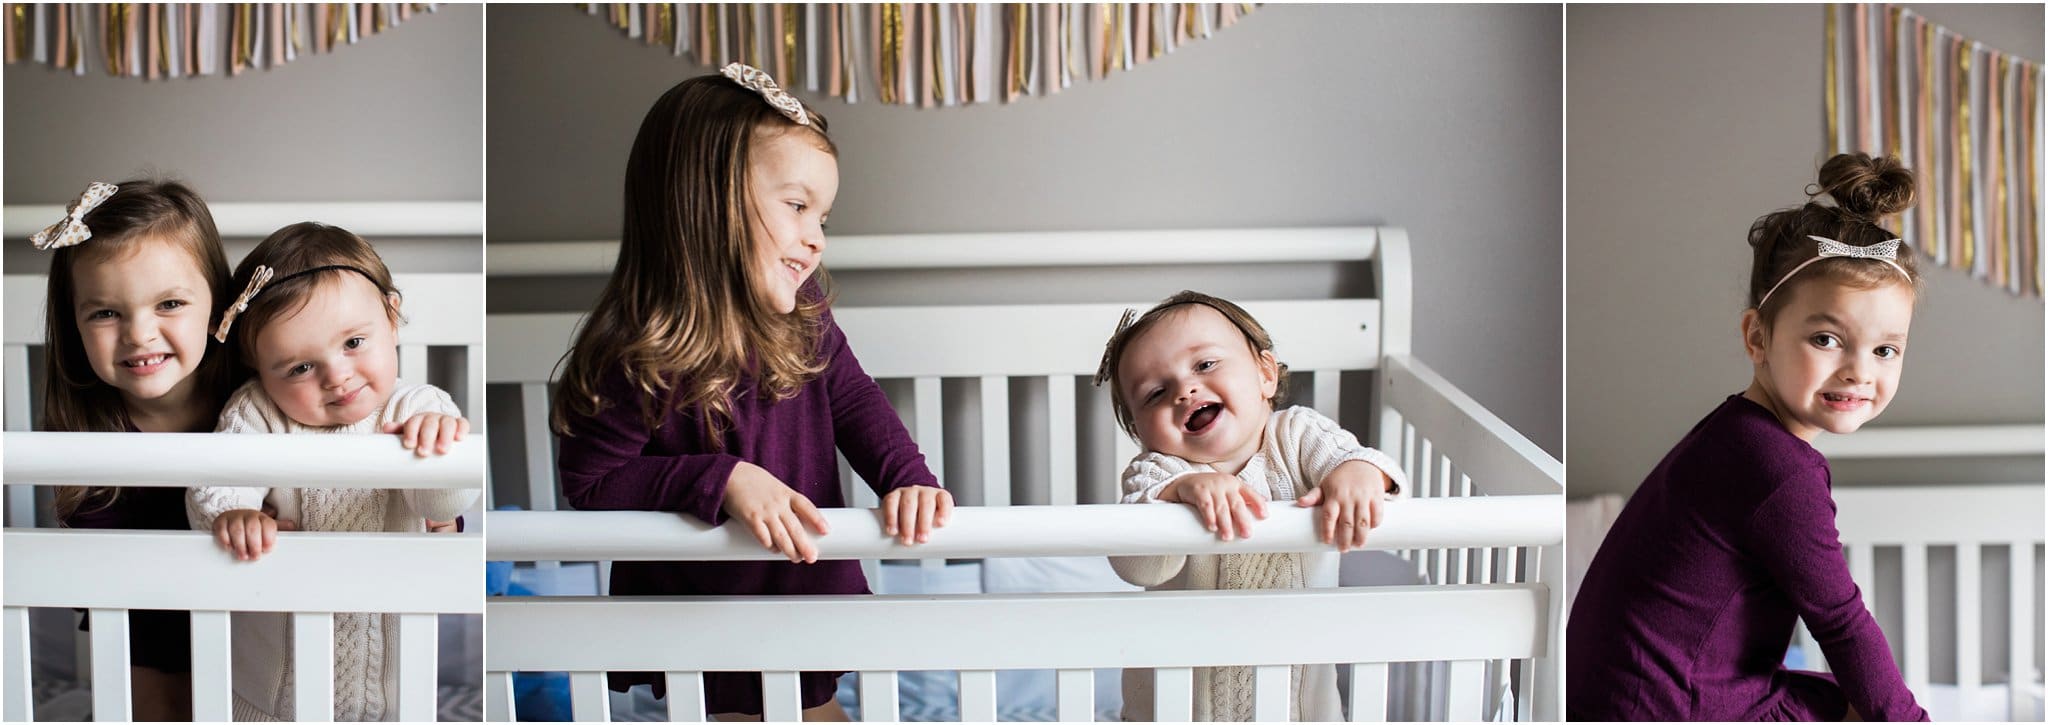 sisters laughing and playing in crib